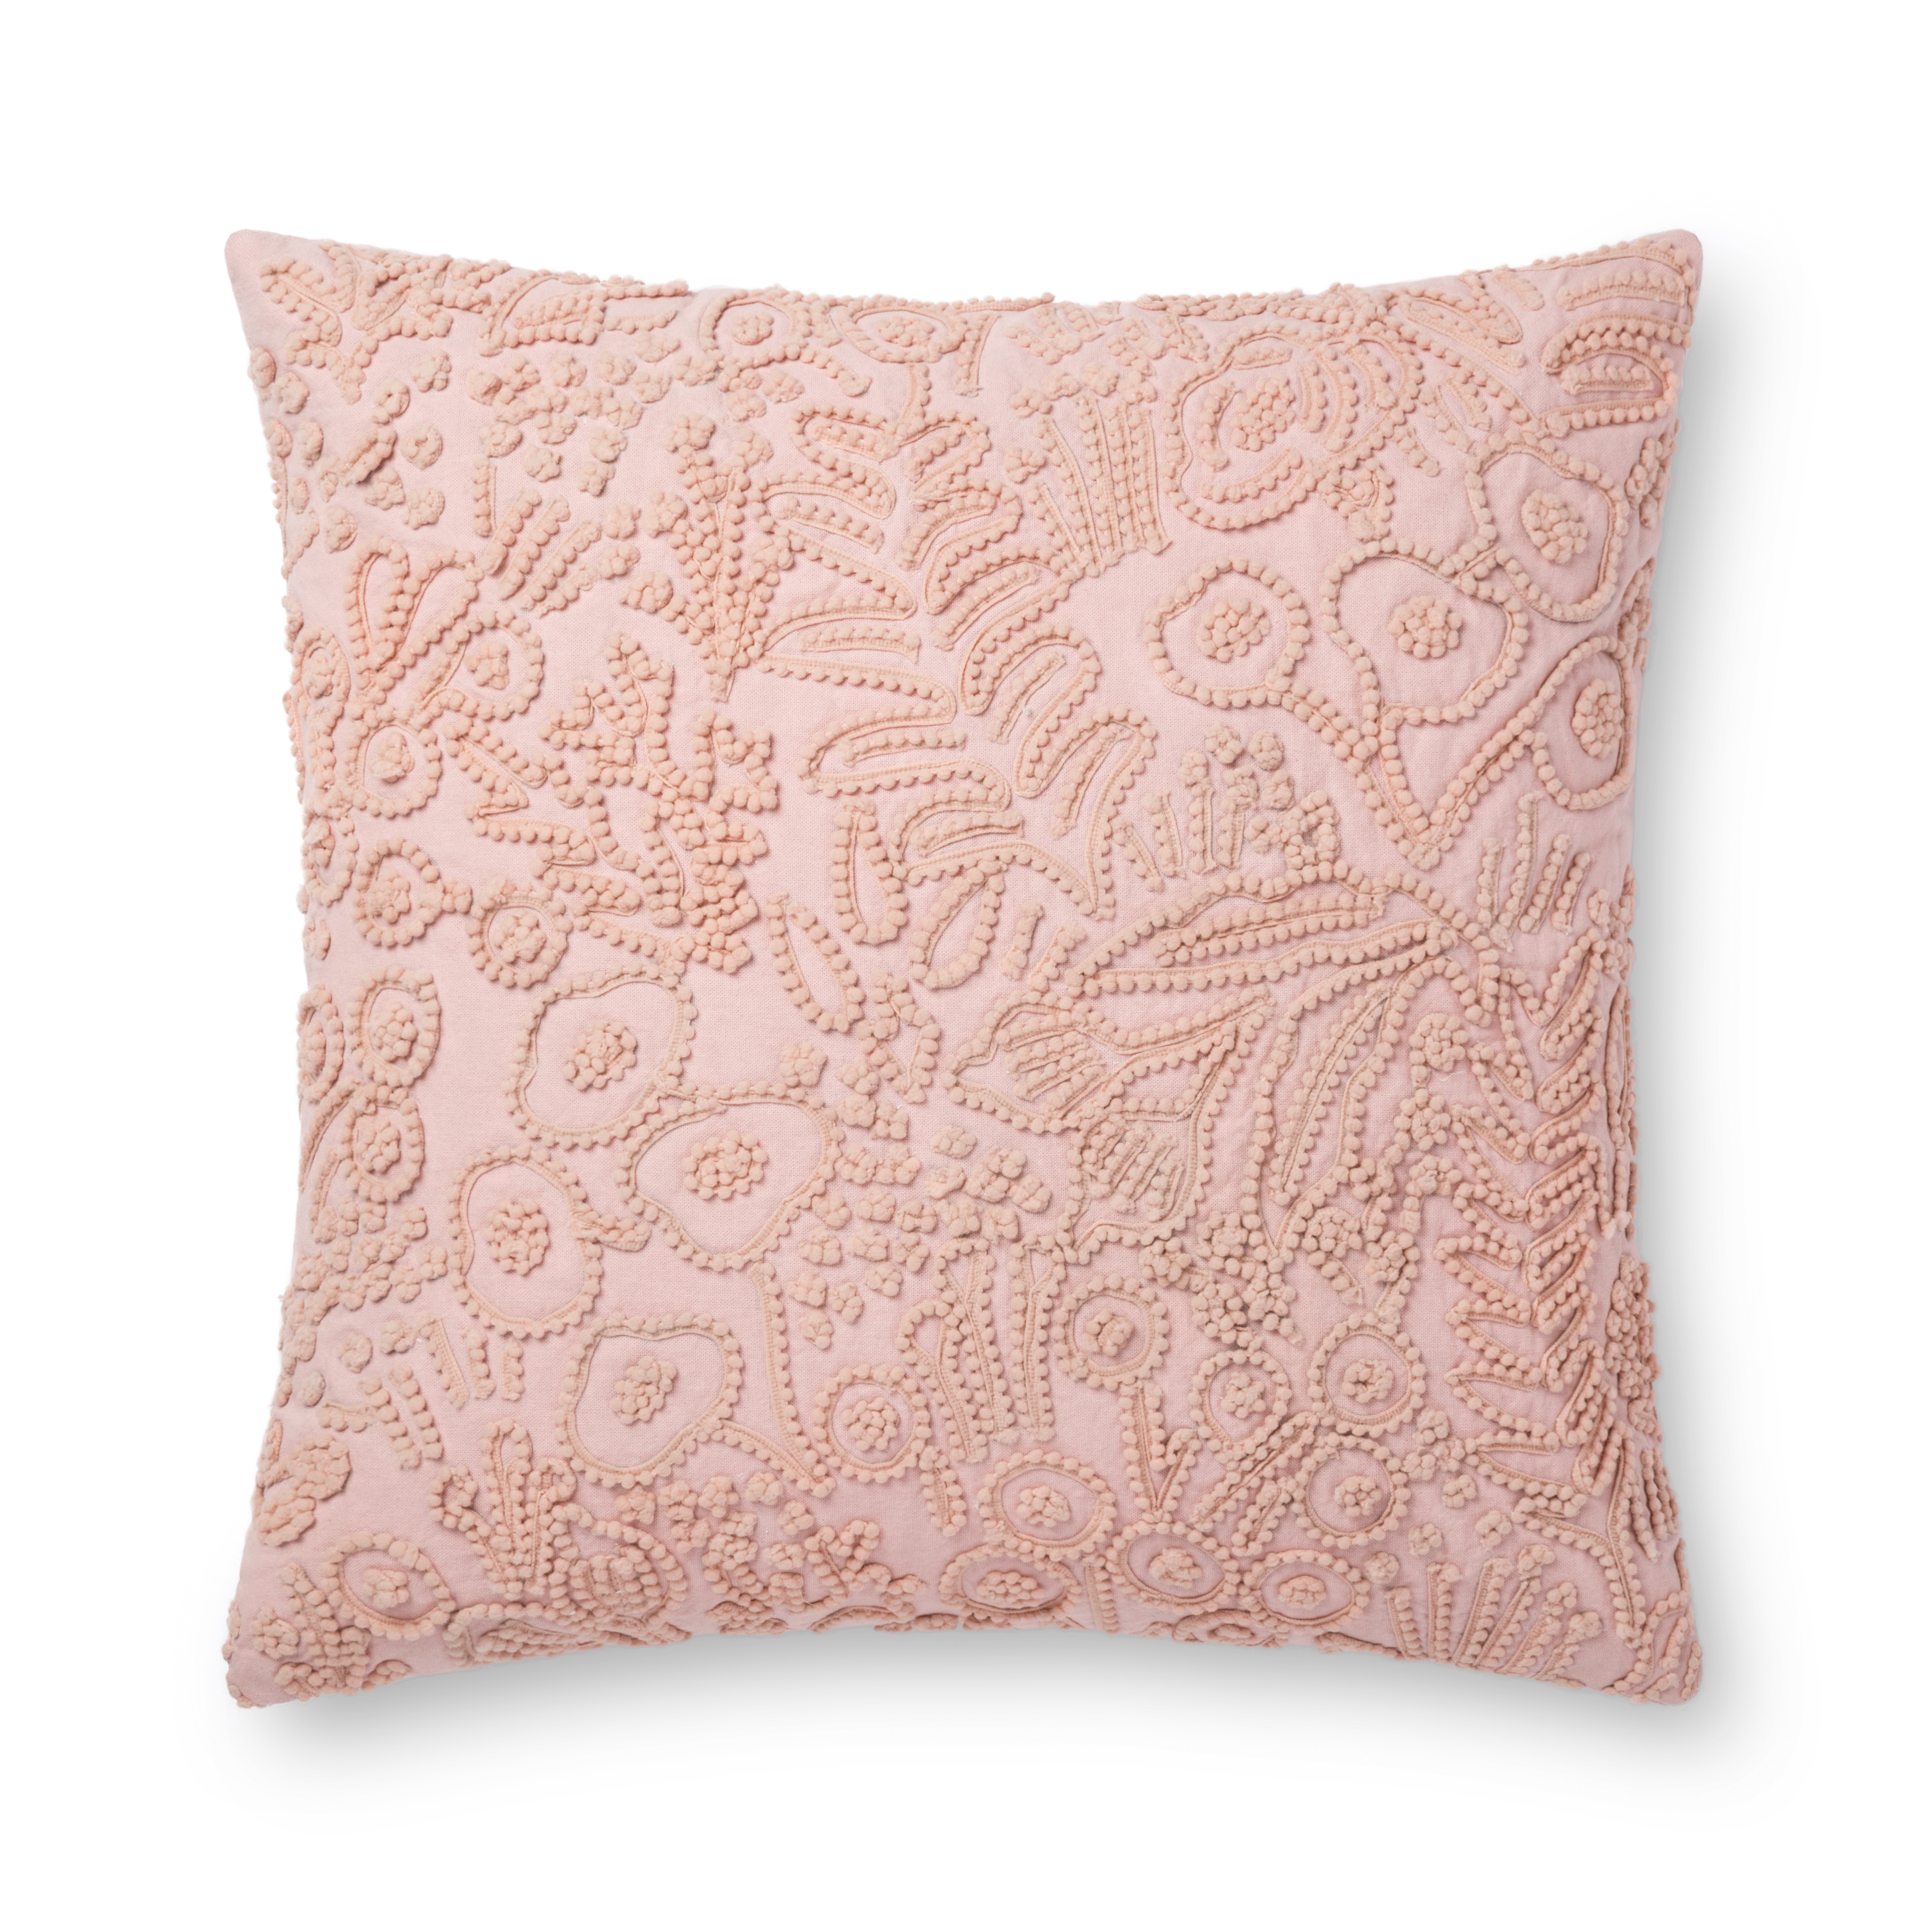 Rifle Paper Co. x Loloi Pillows P6030 Rose 22" x 22" Cover Only - Image 0